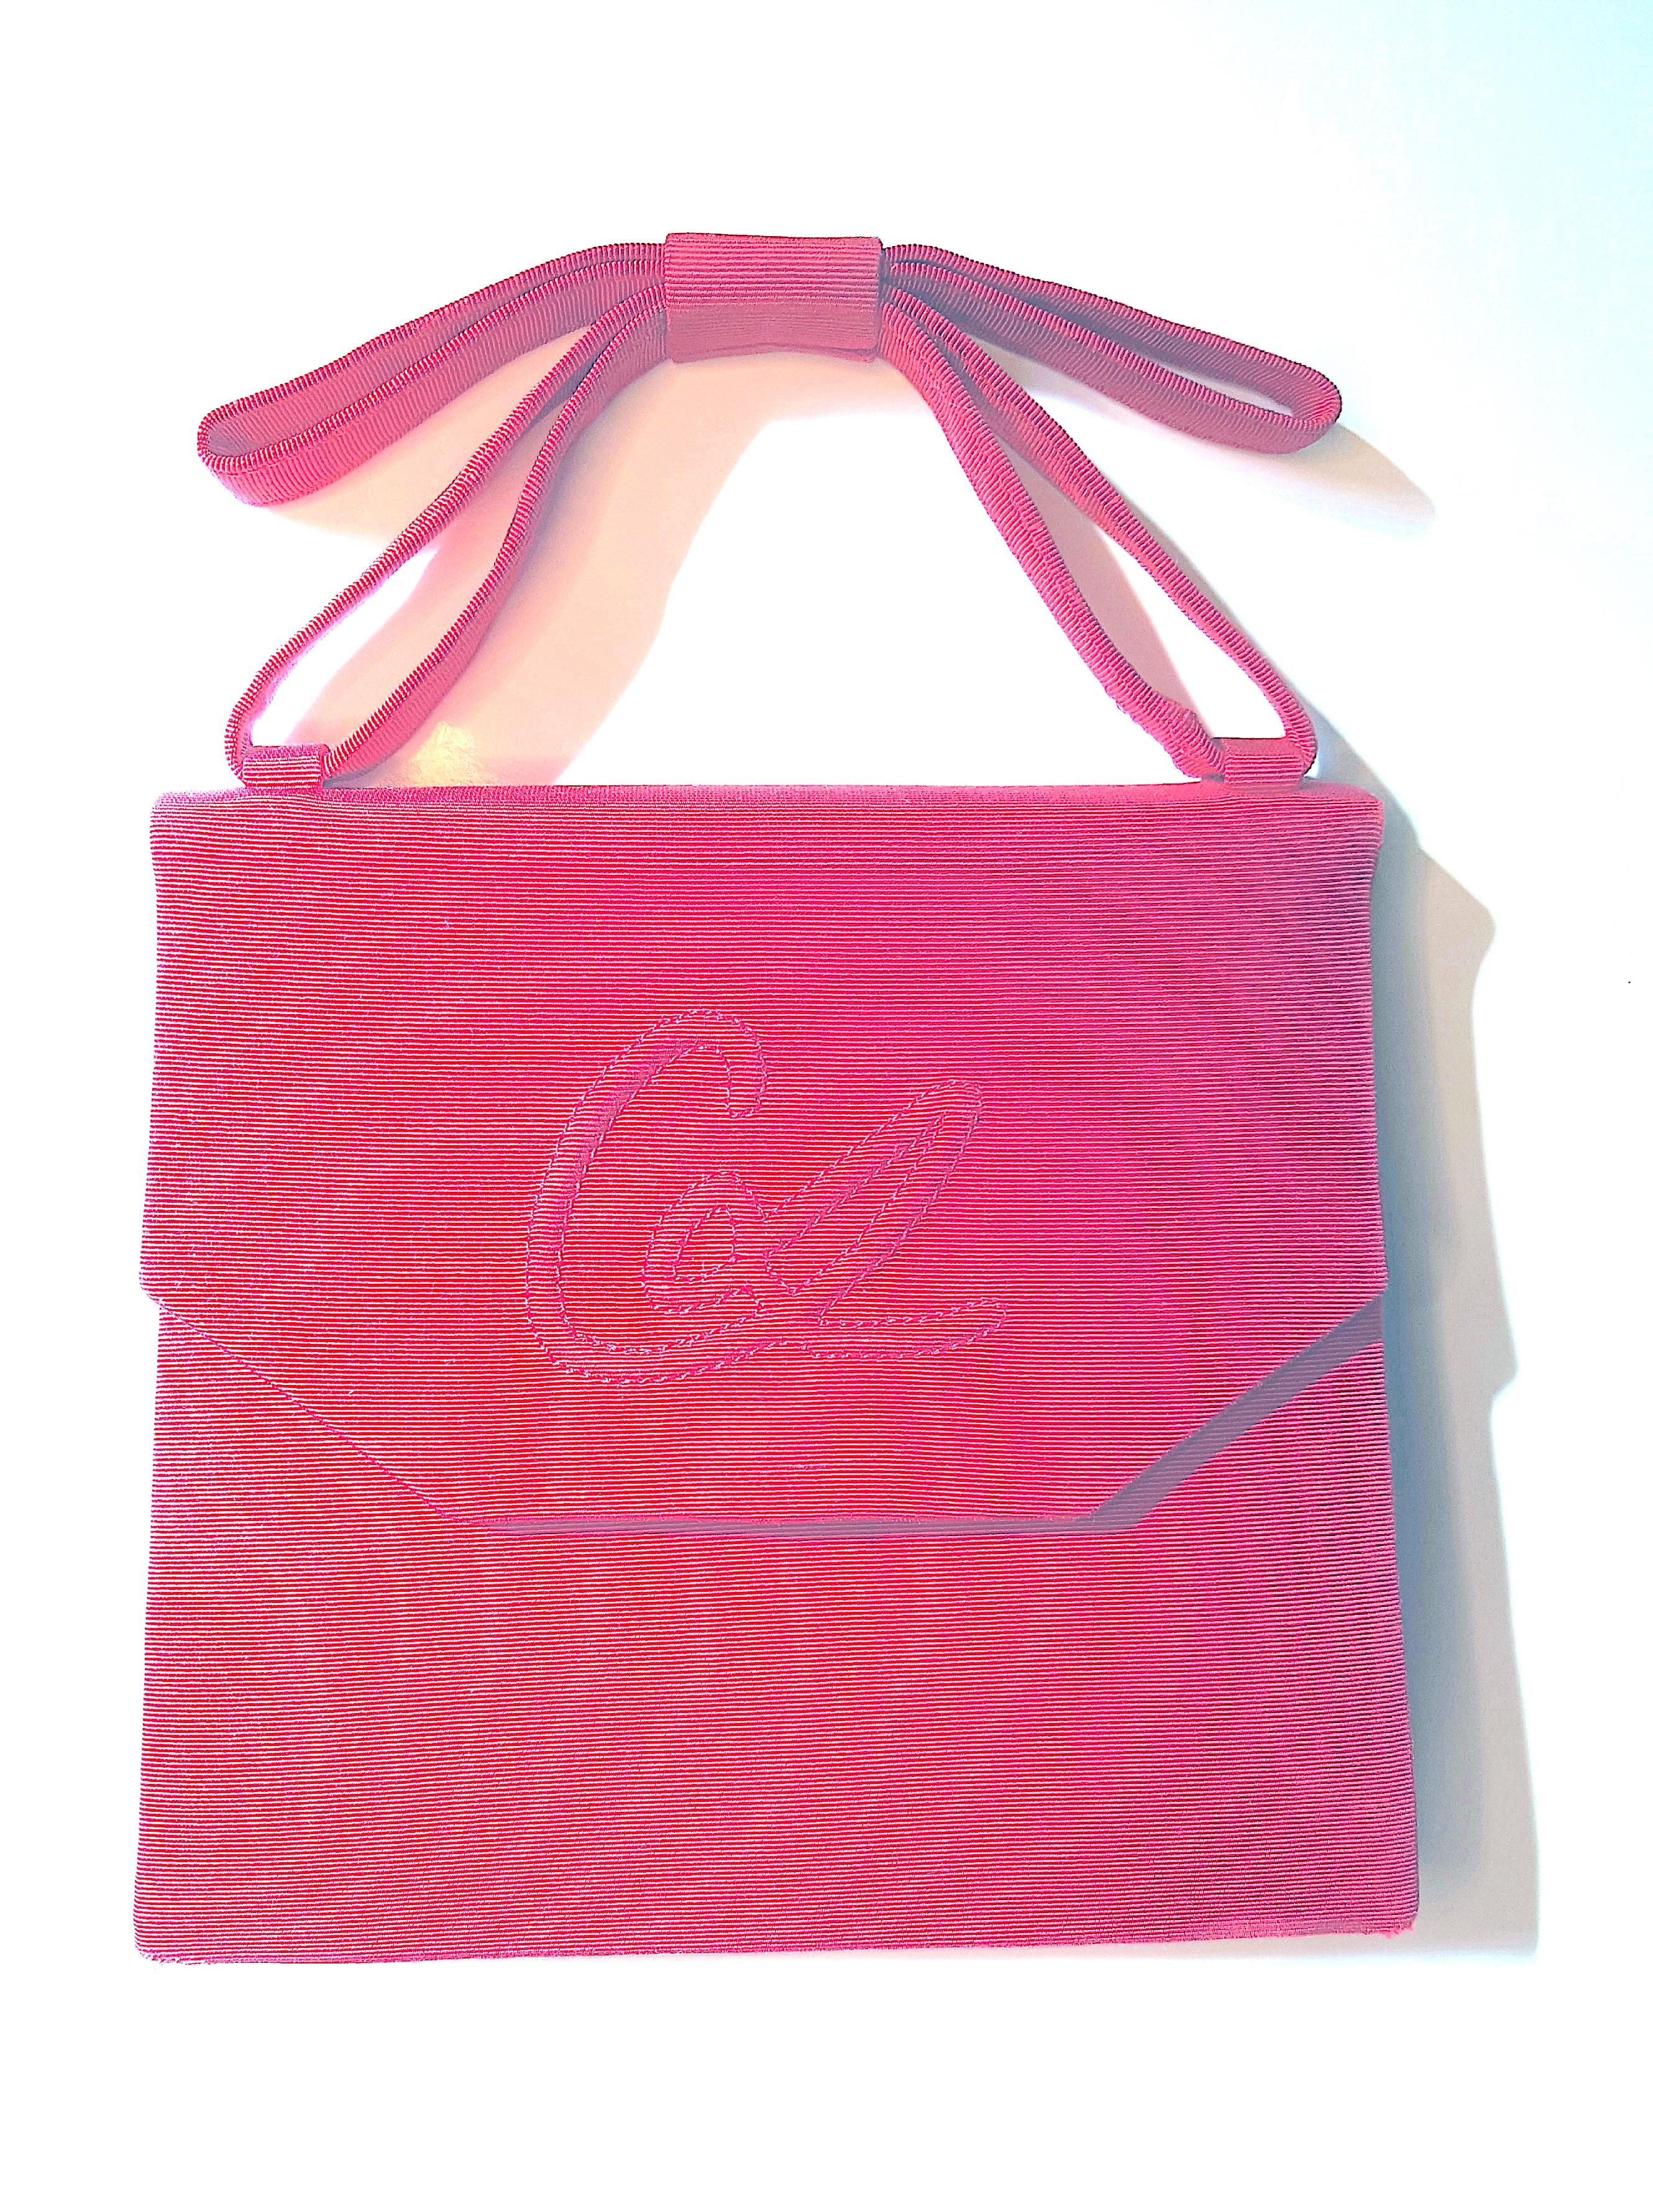 Artisan Couture ChristianLacroixParis CL Embroidery DoubleBowHandle PinkSilk Evening Bag For Sale